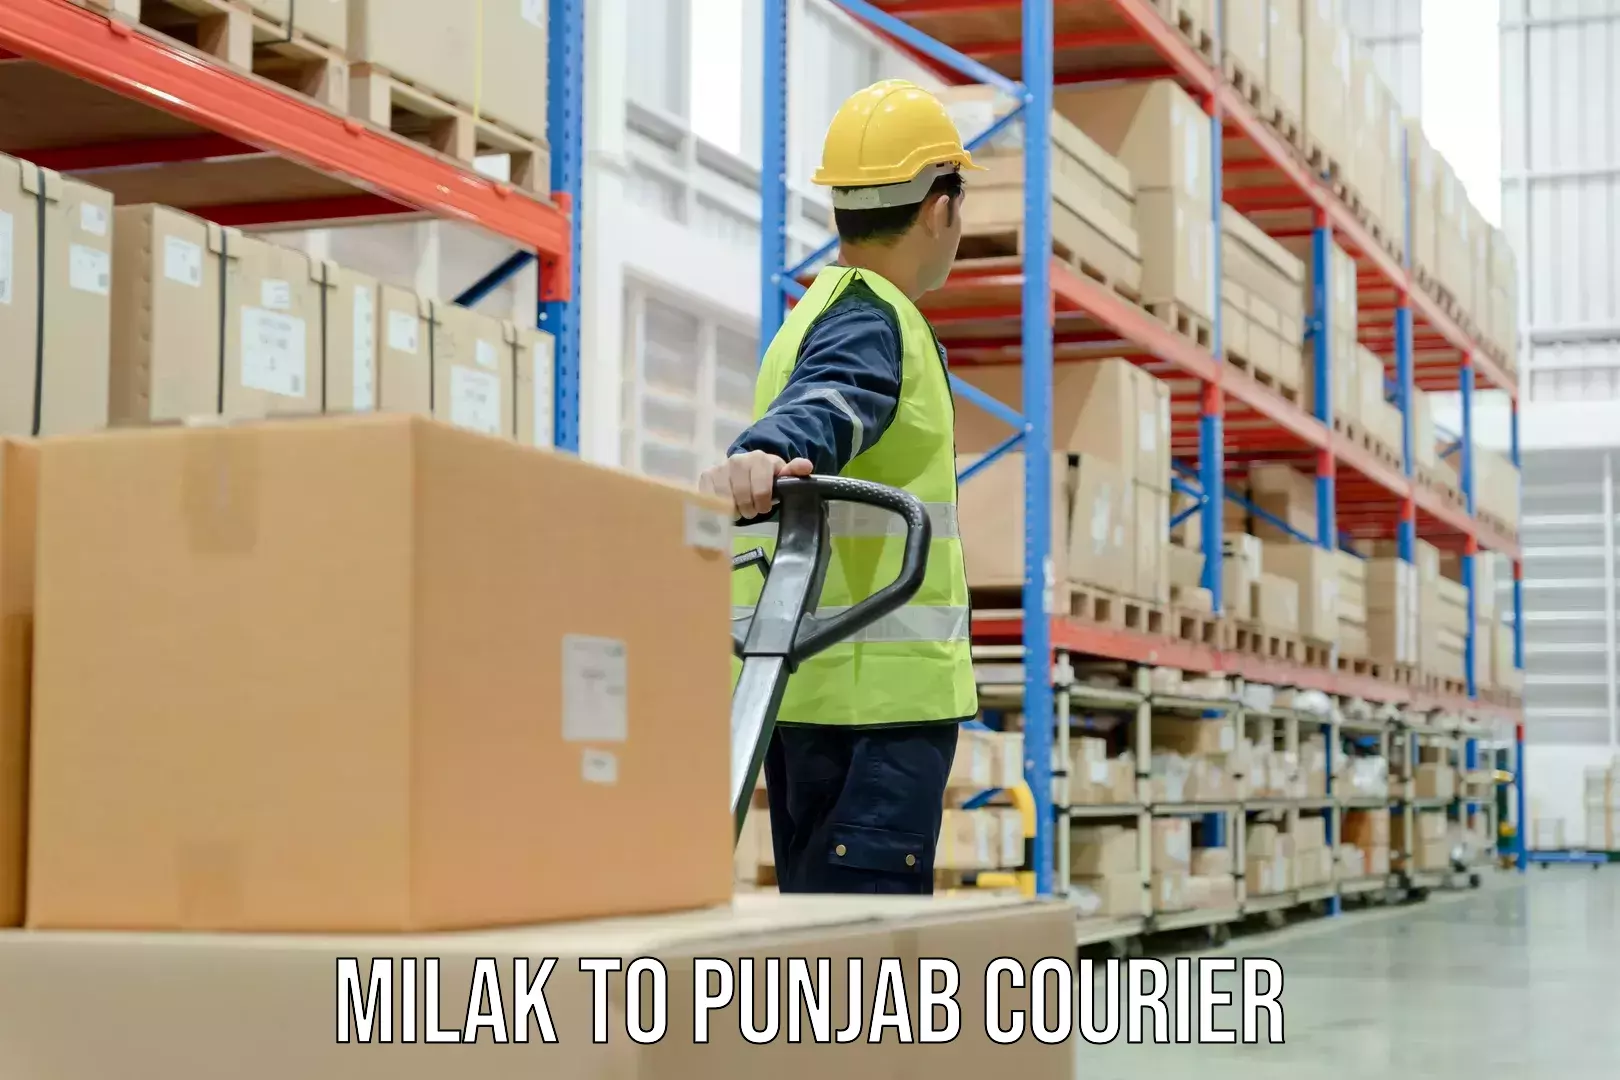 Speedy delivery service Milak to Mohali